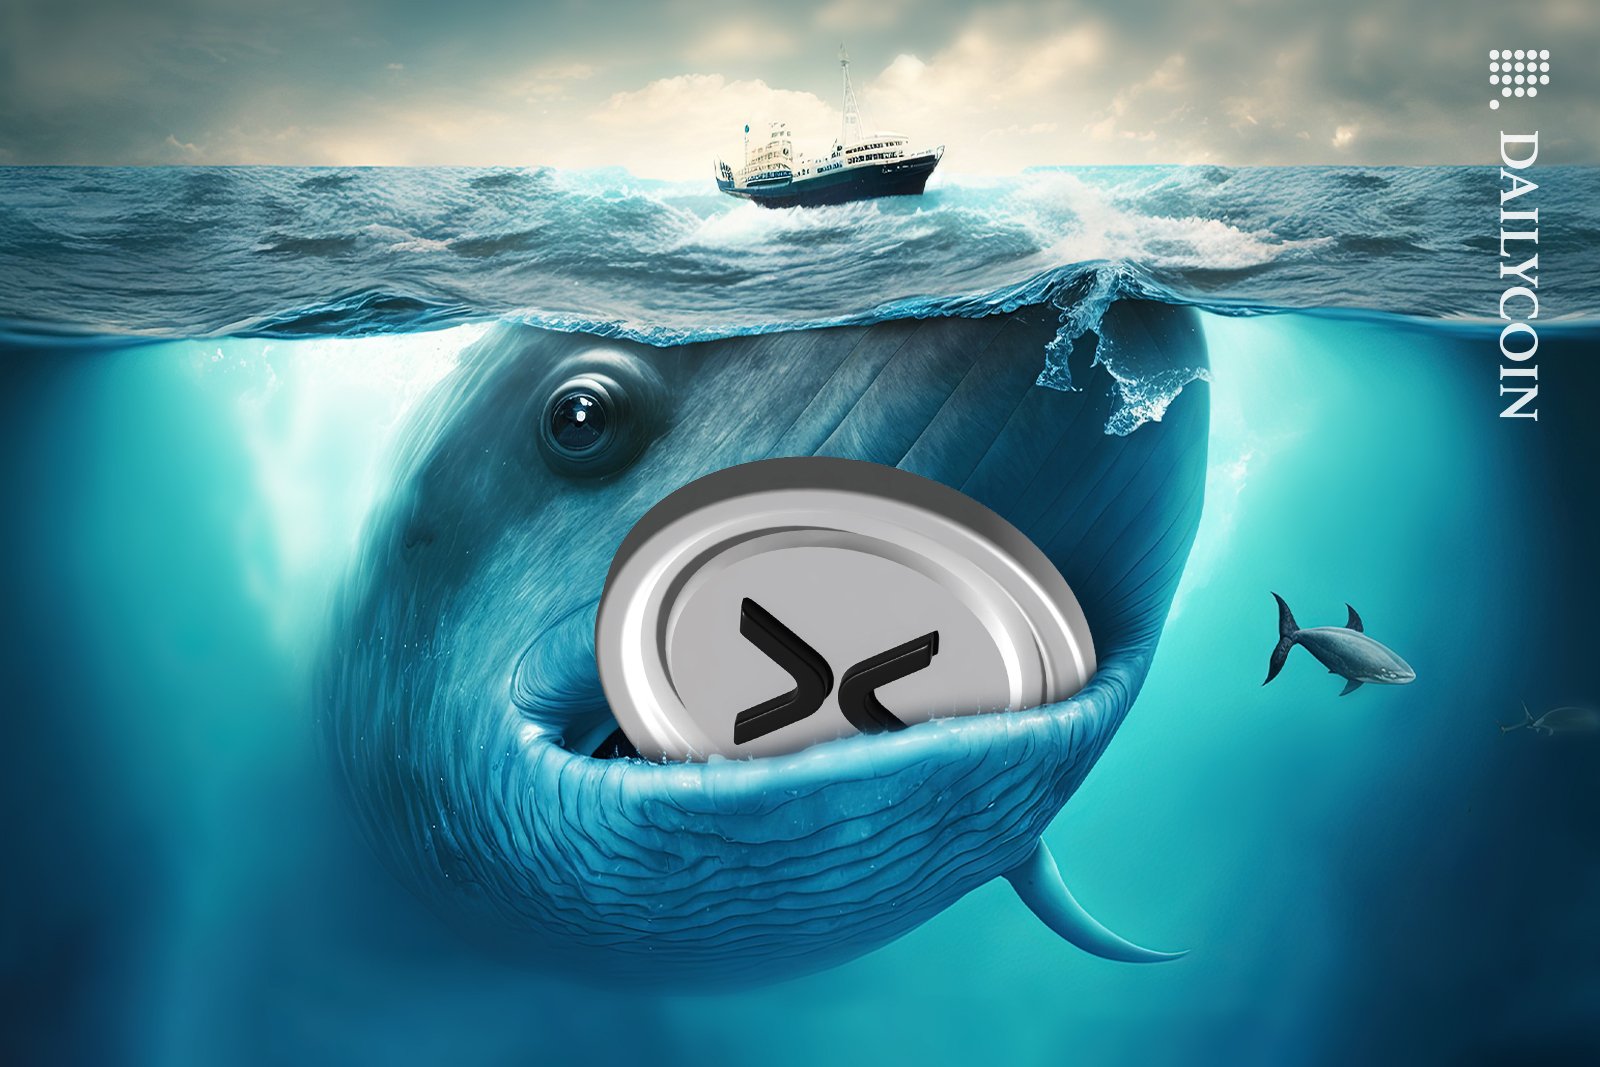 A tiny boat floating above the massive Whale with a XRP coin in its mouth.